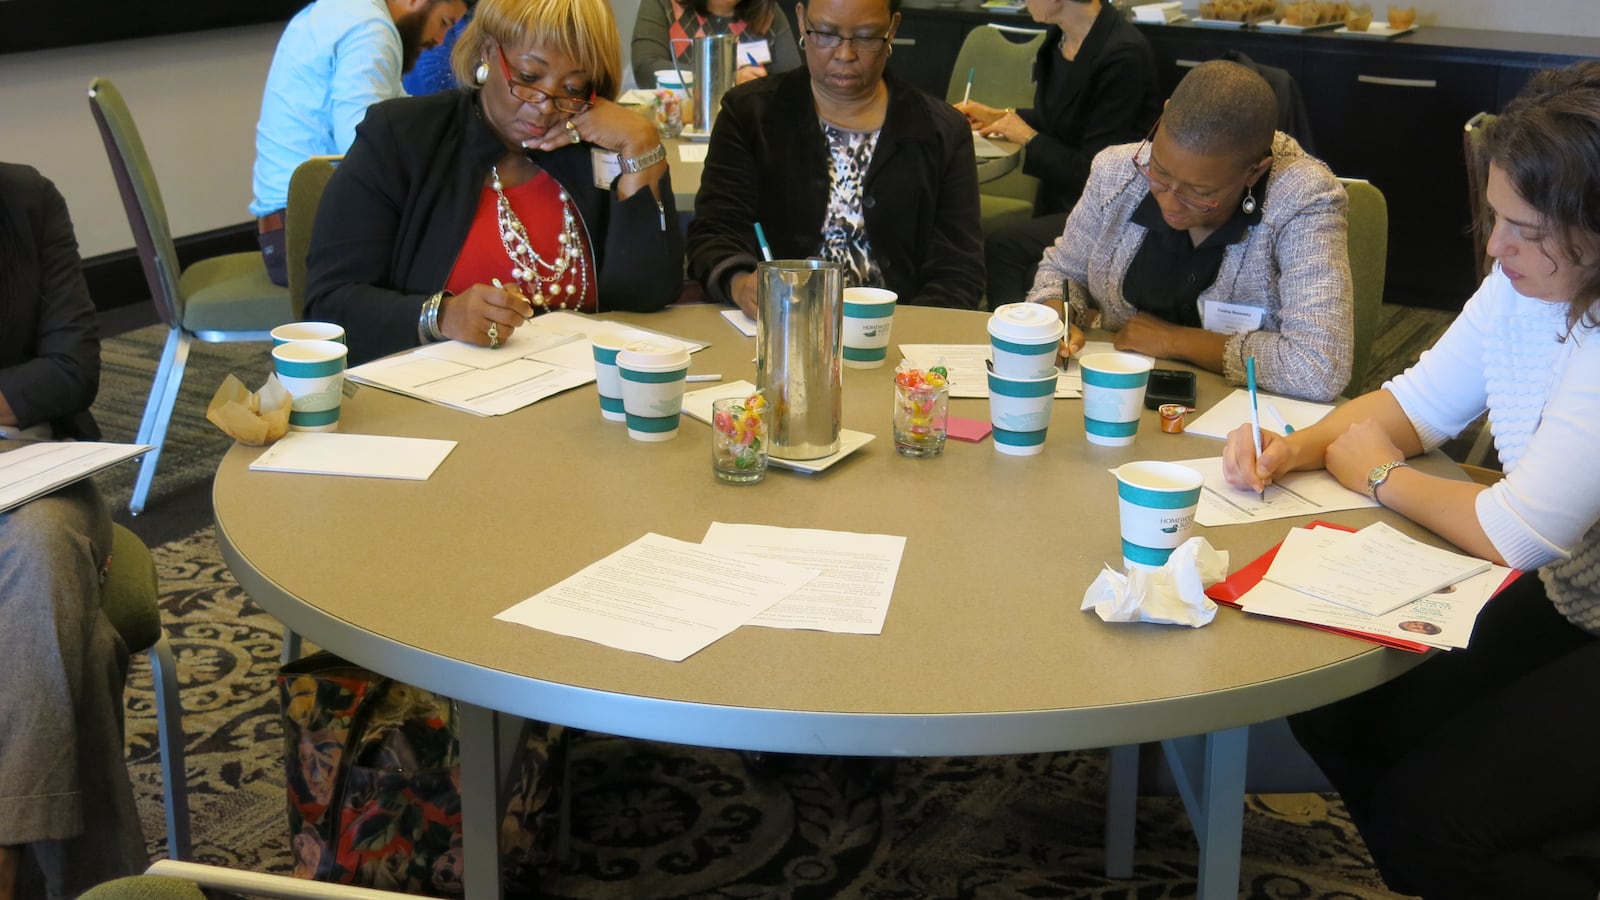 From left: Tennessee NAACP President Gloria Sweet-Love,  NAACP Treasurer Alicia Brooks, and Teacher Town Memphis advocacy director Tosha Downey participate in an organizational meeting in Nashville.